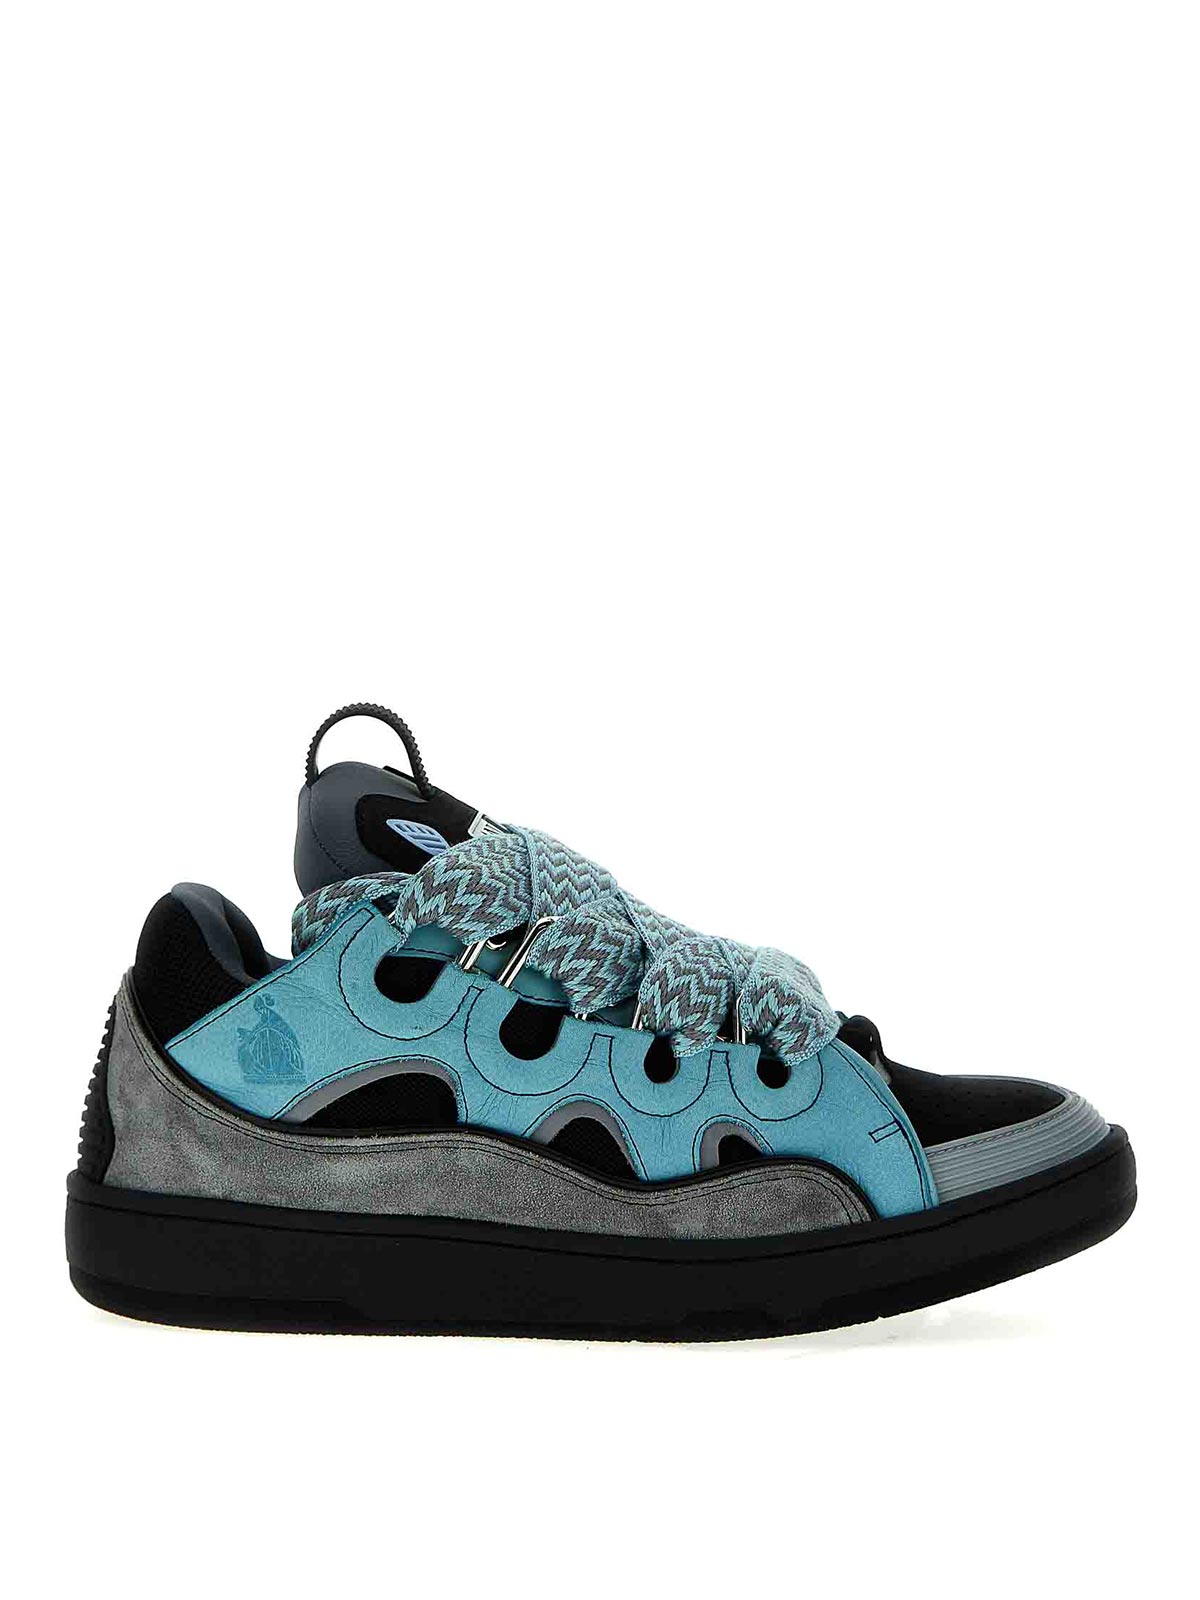 LANVIN OVERSIZED CURB SNEAKERS LACES